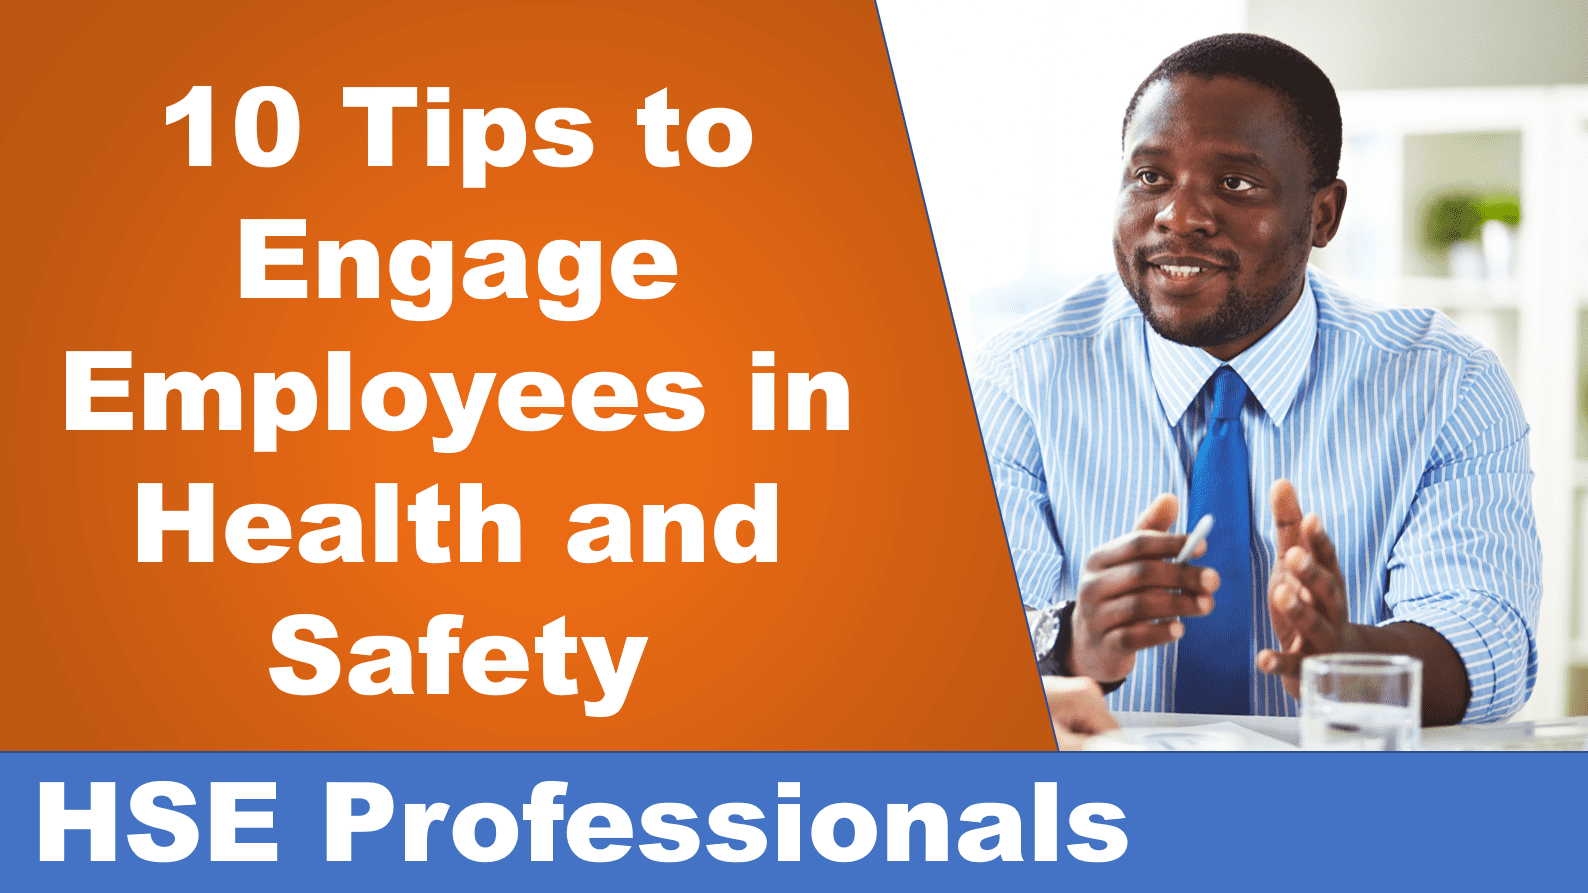 10 Tips to Engage Employees in Safety